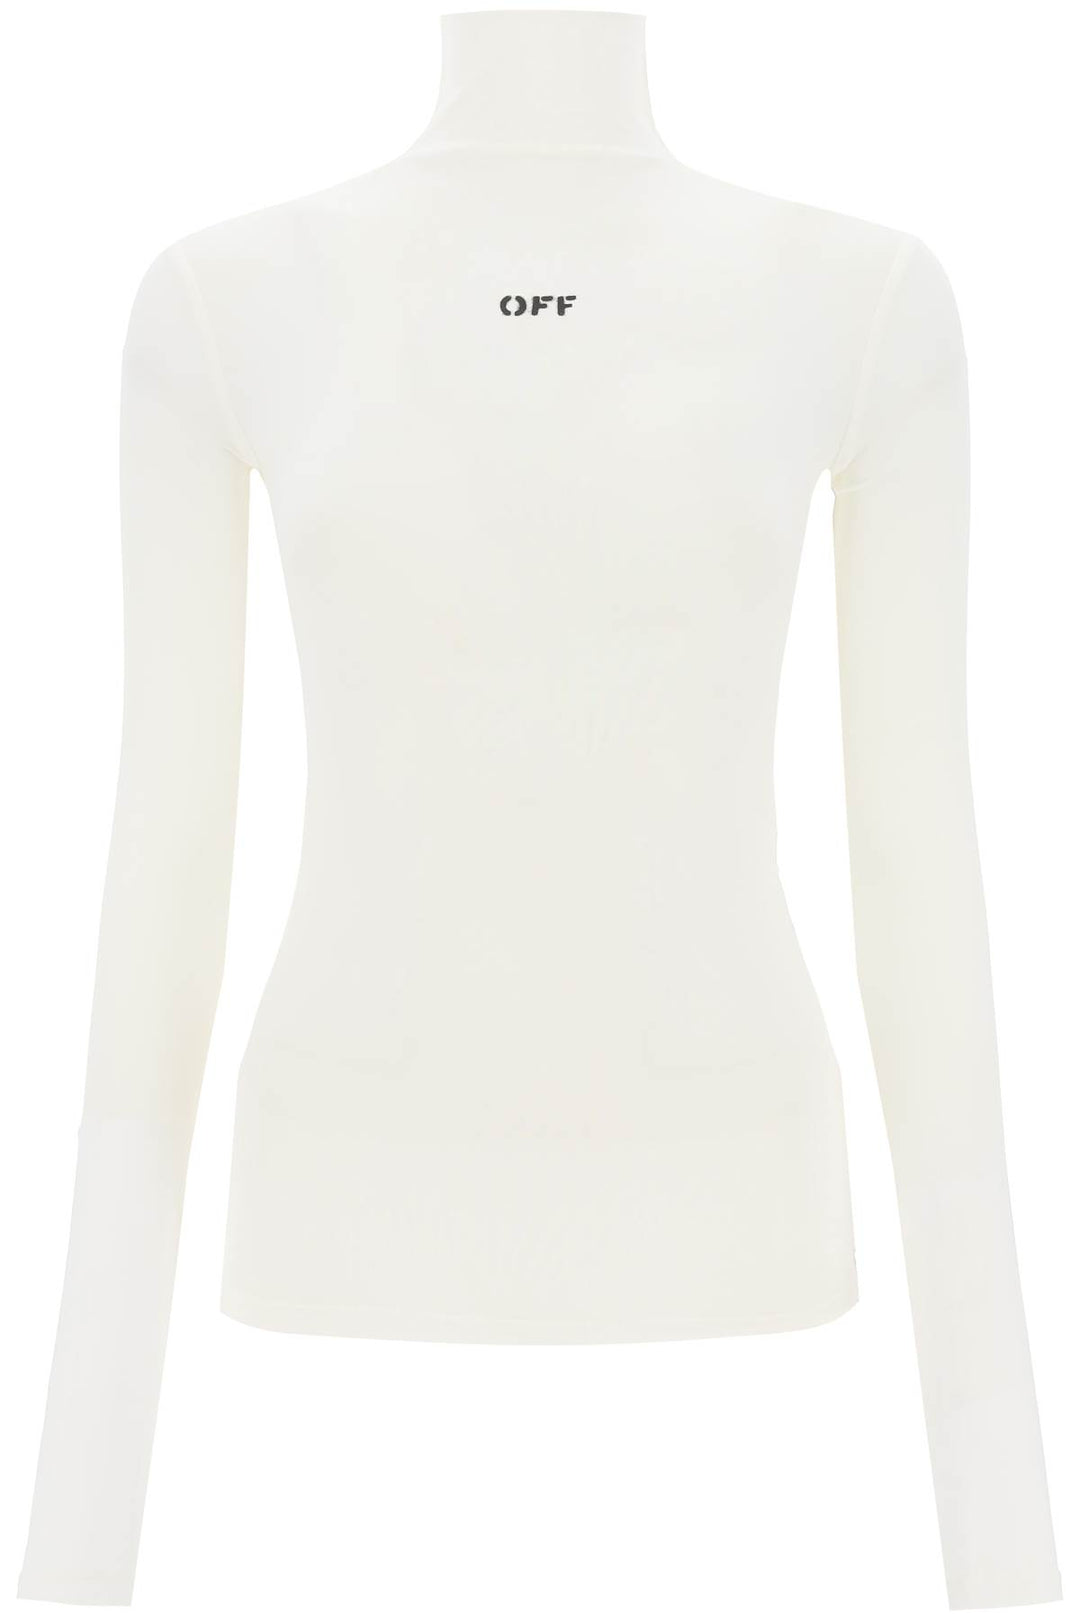 Off White Funnel Neck T Shirt With Off Logo   Bianco